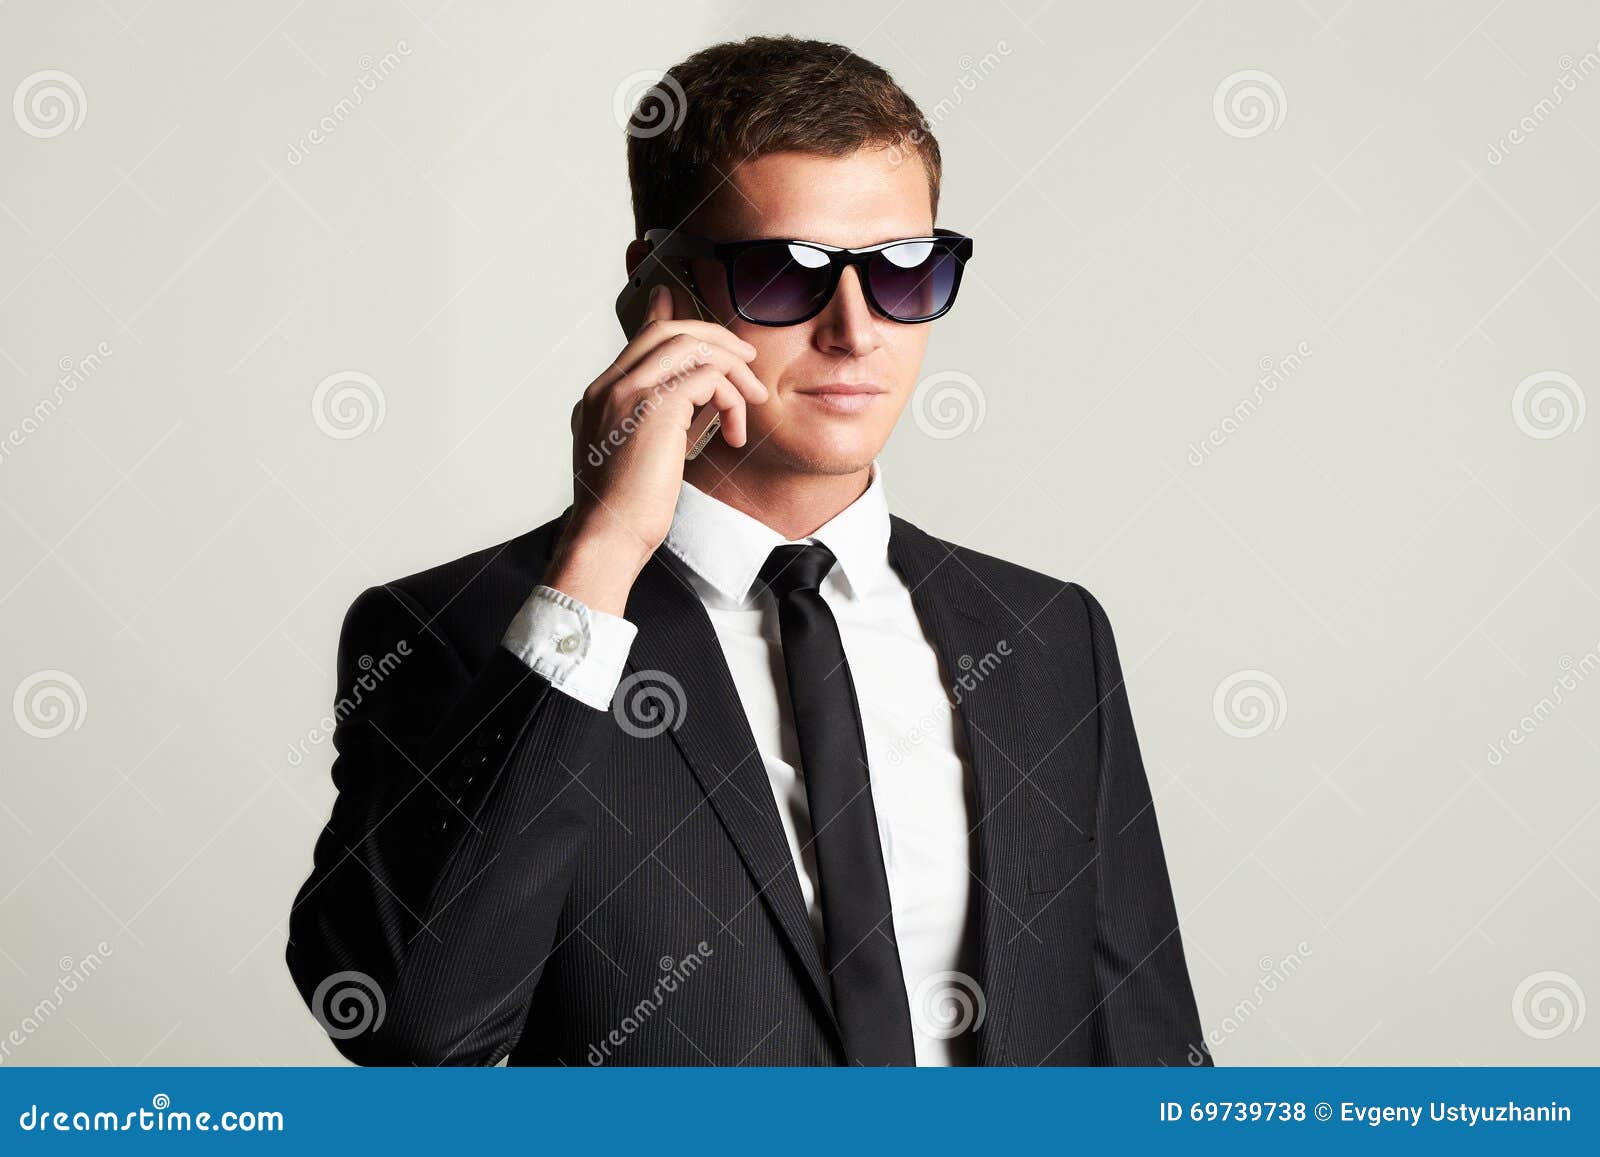 businessman-phone-handsome-man-suit-sunglasses-young-69739738.jpg